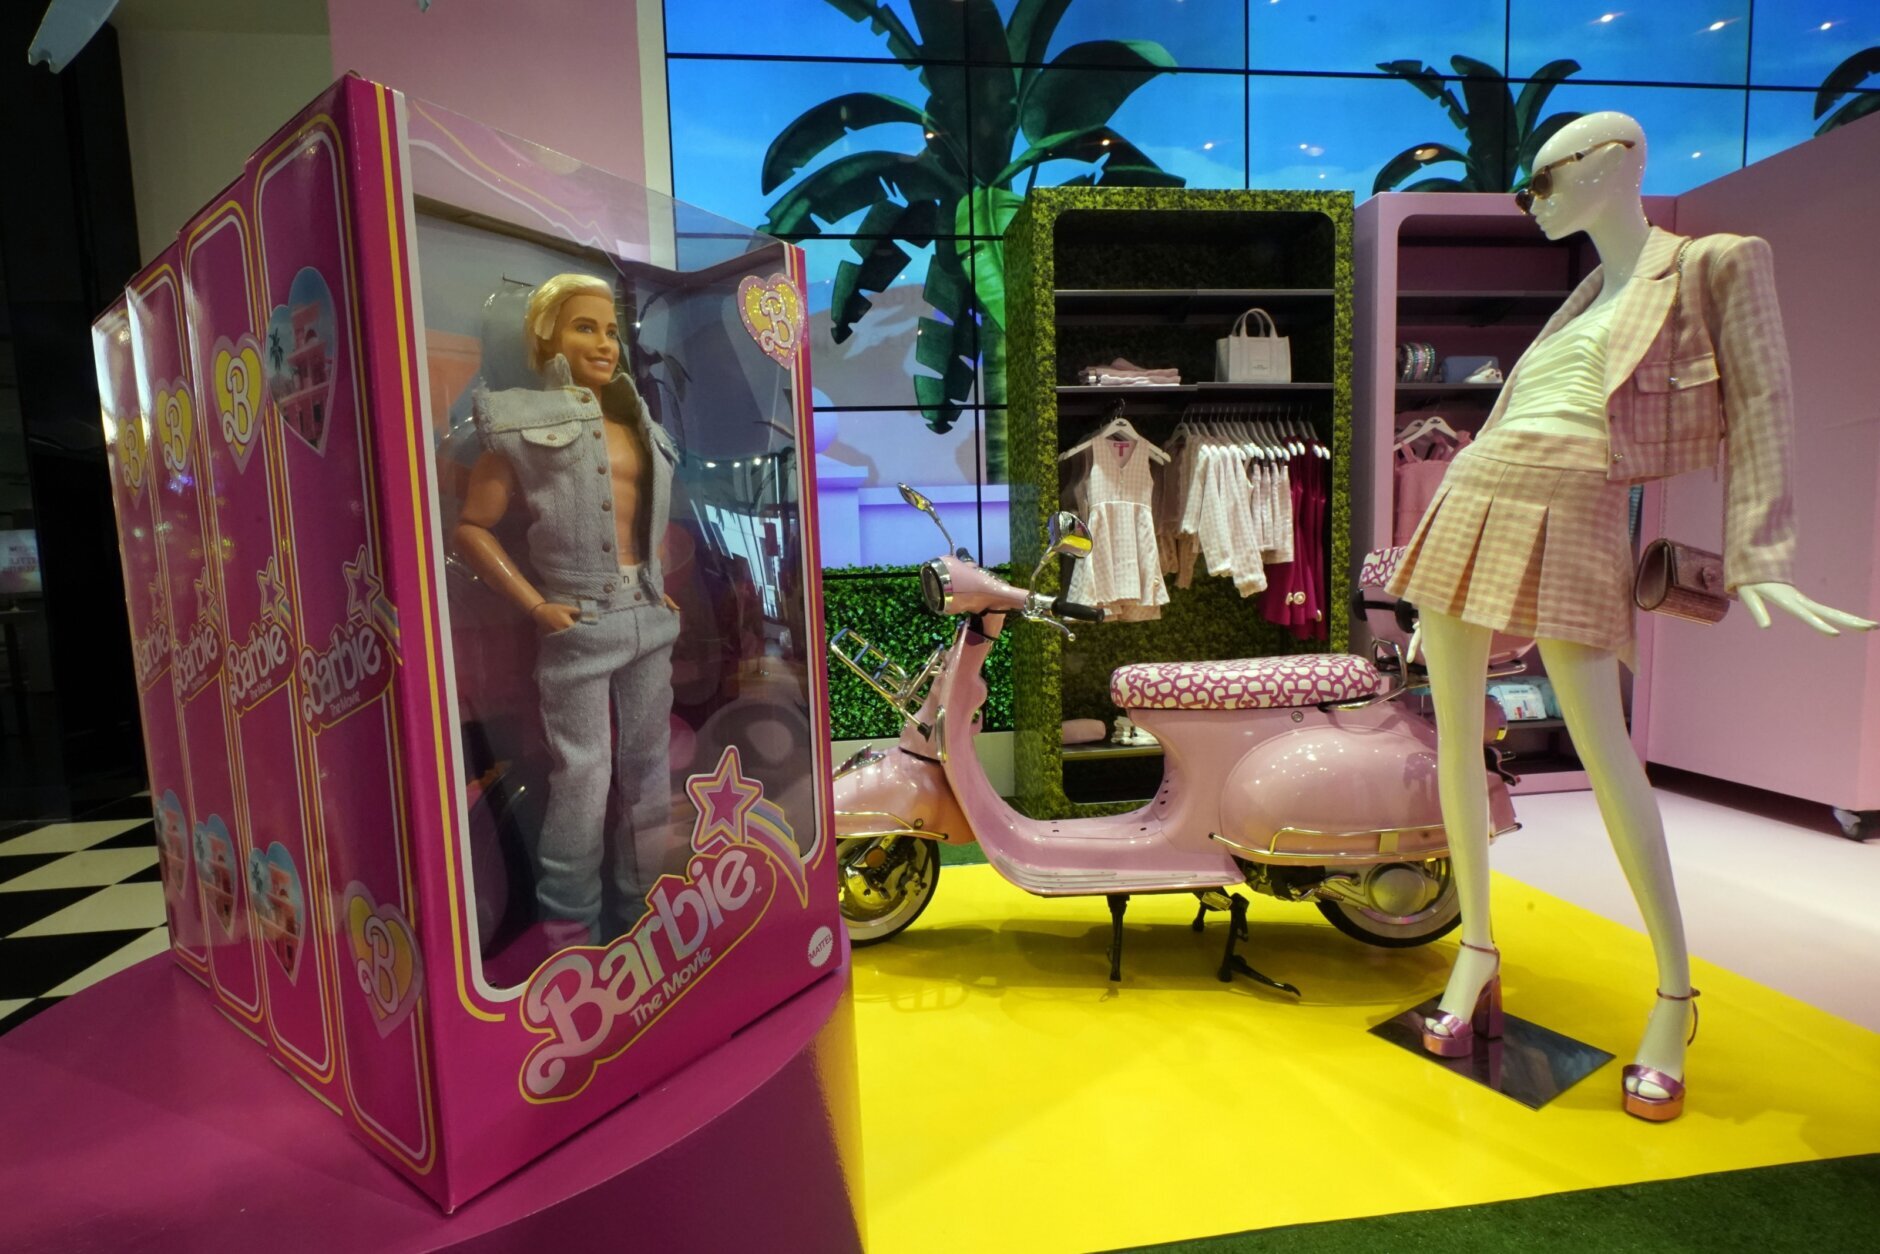 Fabulous Barbies Dressed in Moschino Are Coming to a Toy Store Near You